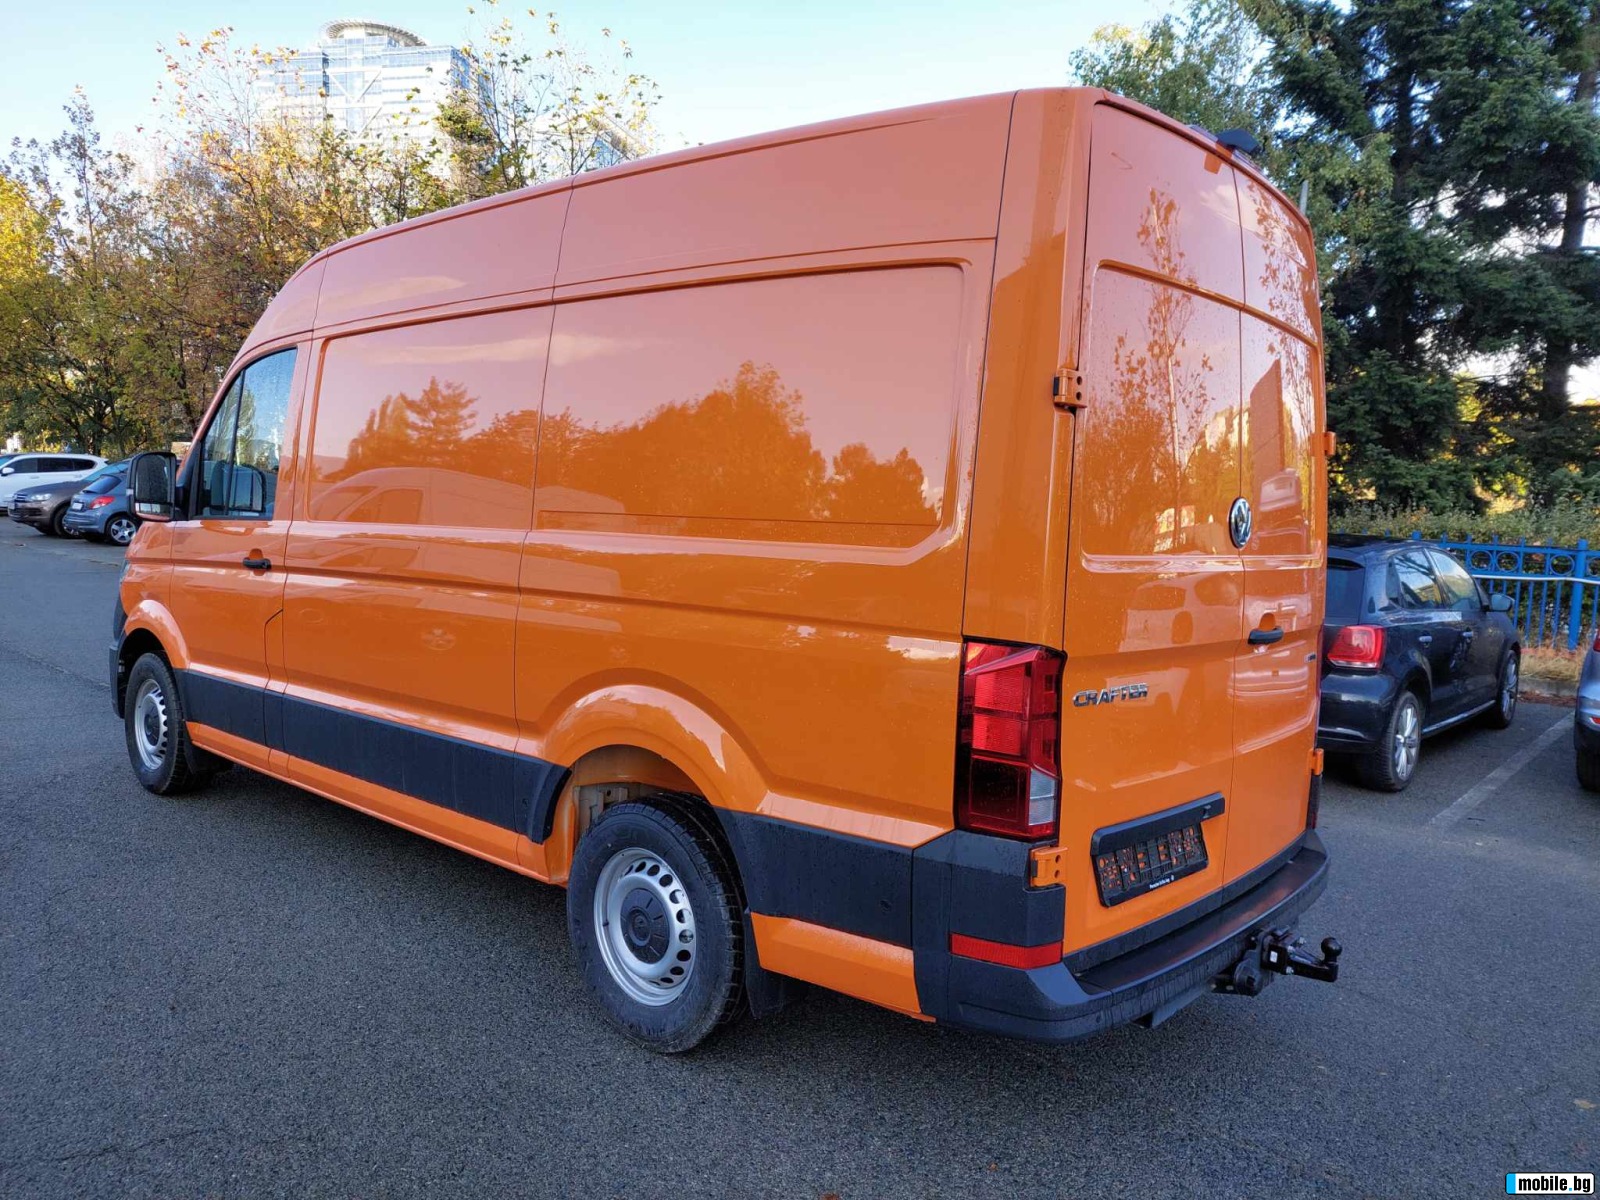 VW Crafter 2,0d 177ps 4x4 AUTOMATIC | Mobile.bg   4